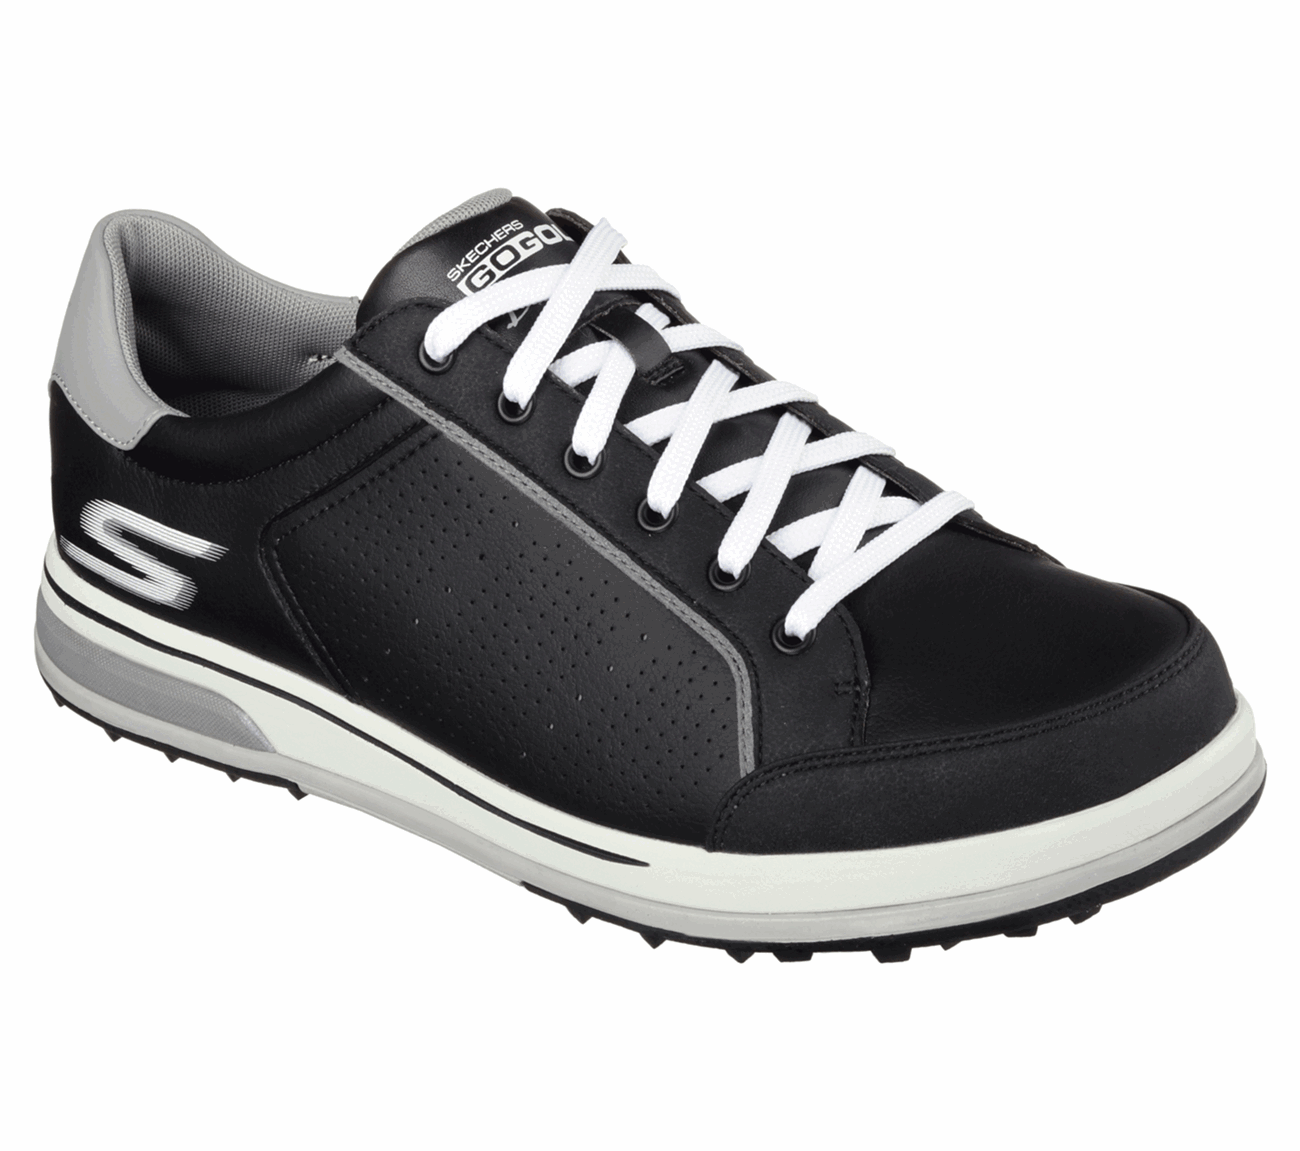 Drive 2 Skechers Performance Shoes